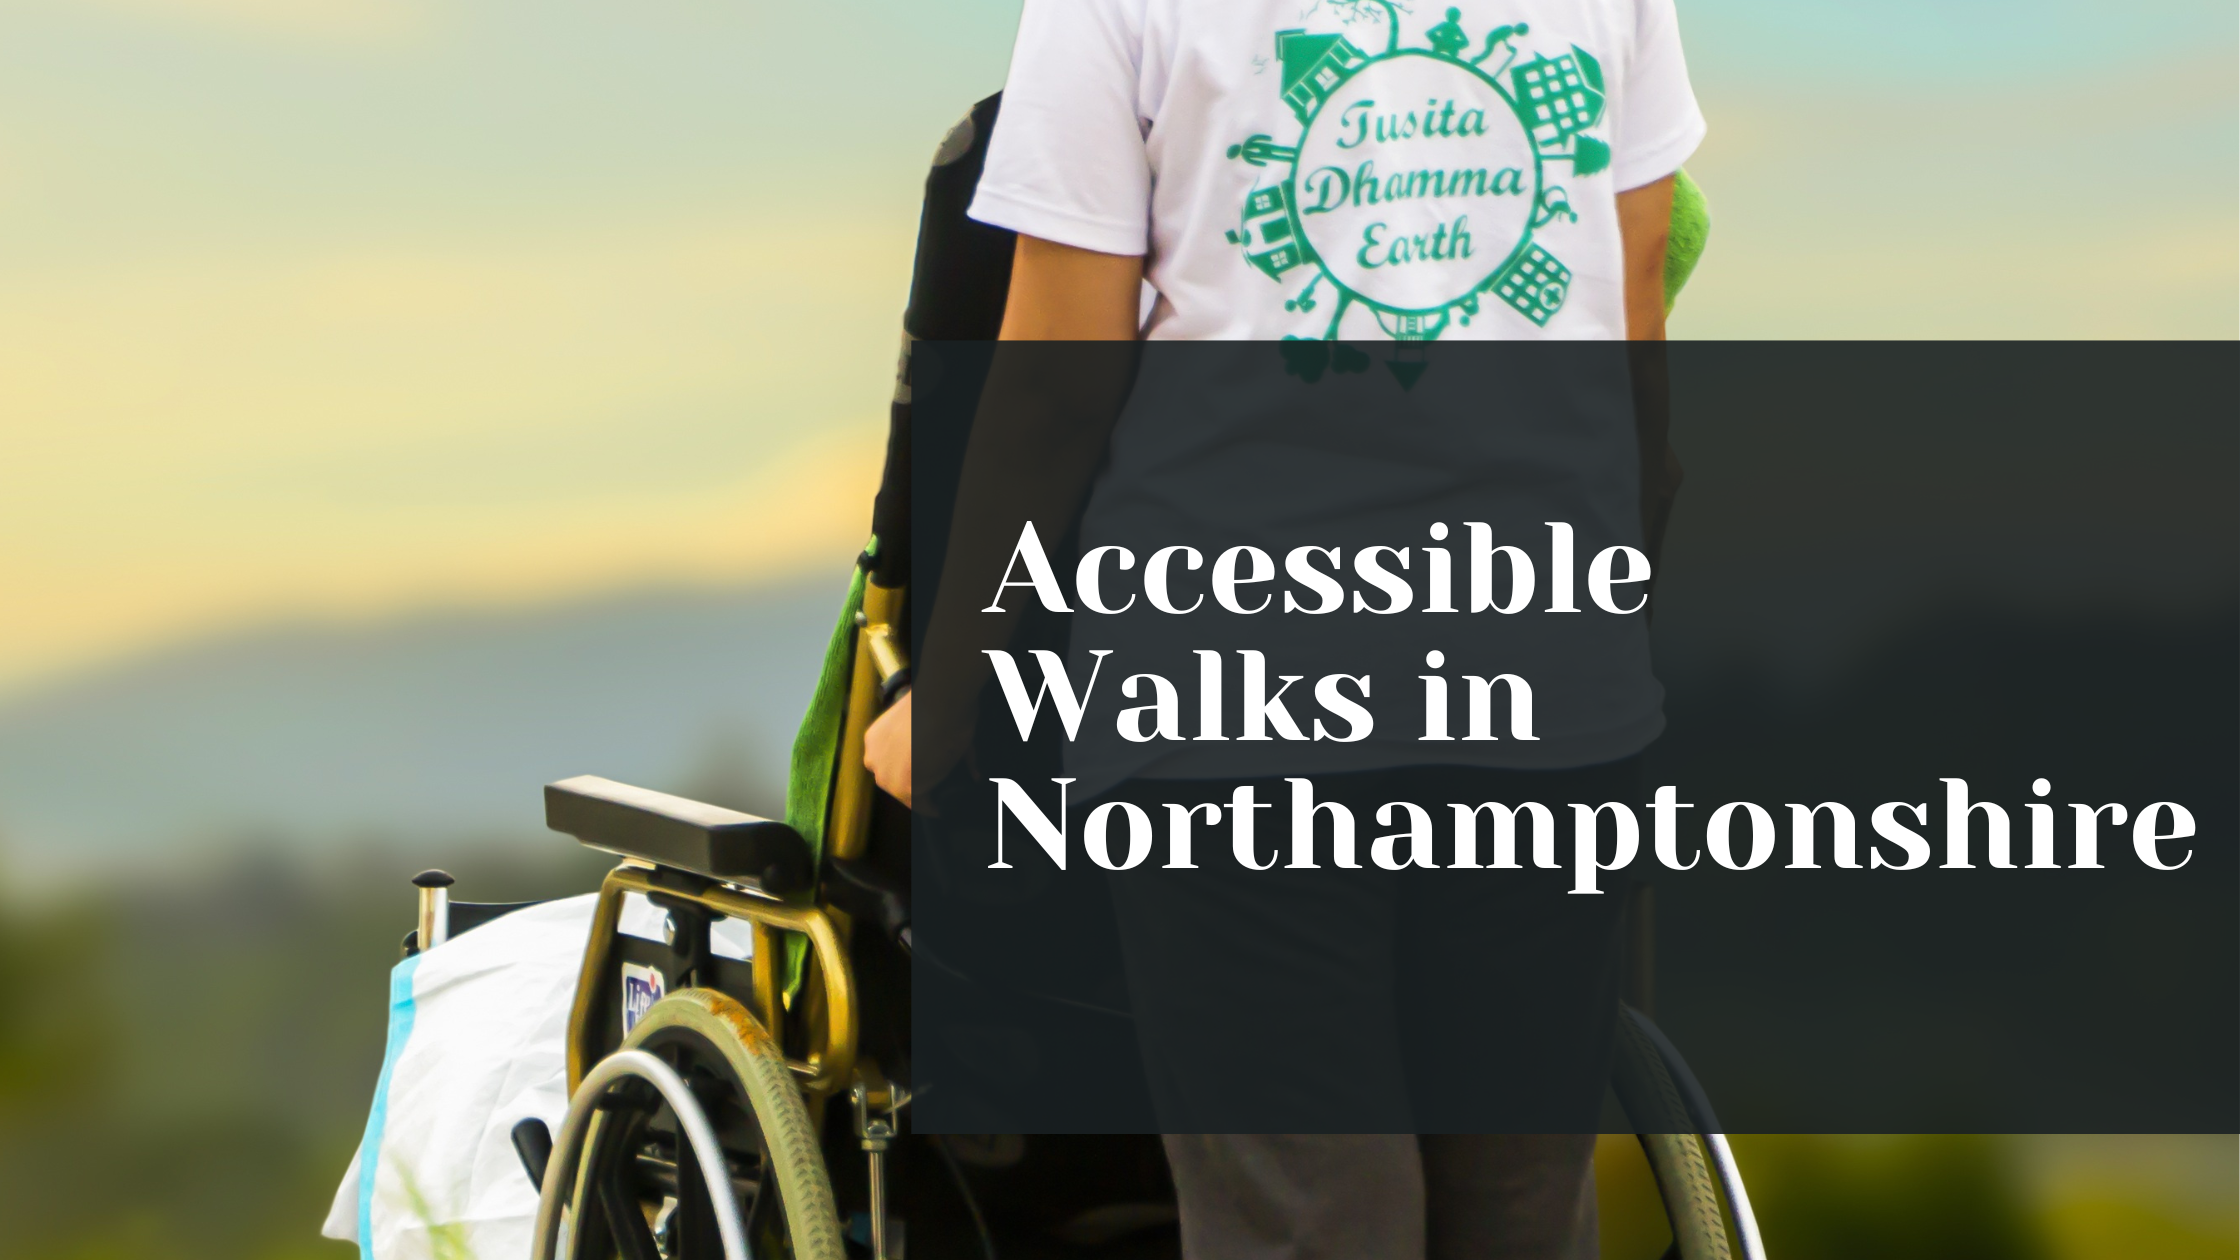 Accessible Walks in Northamptonshire